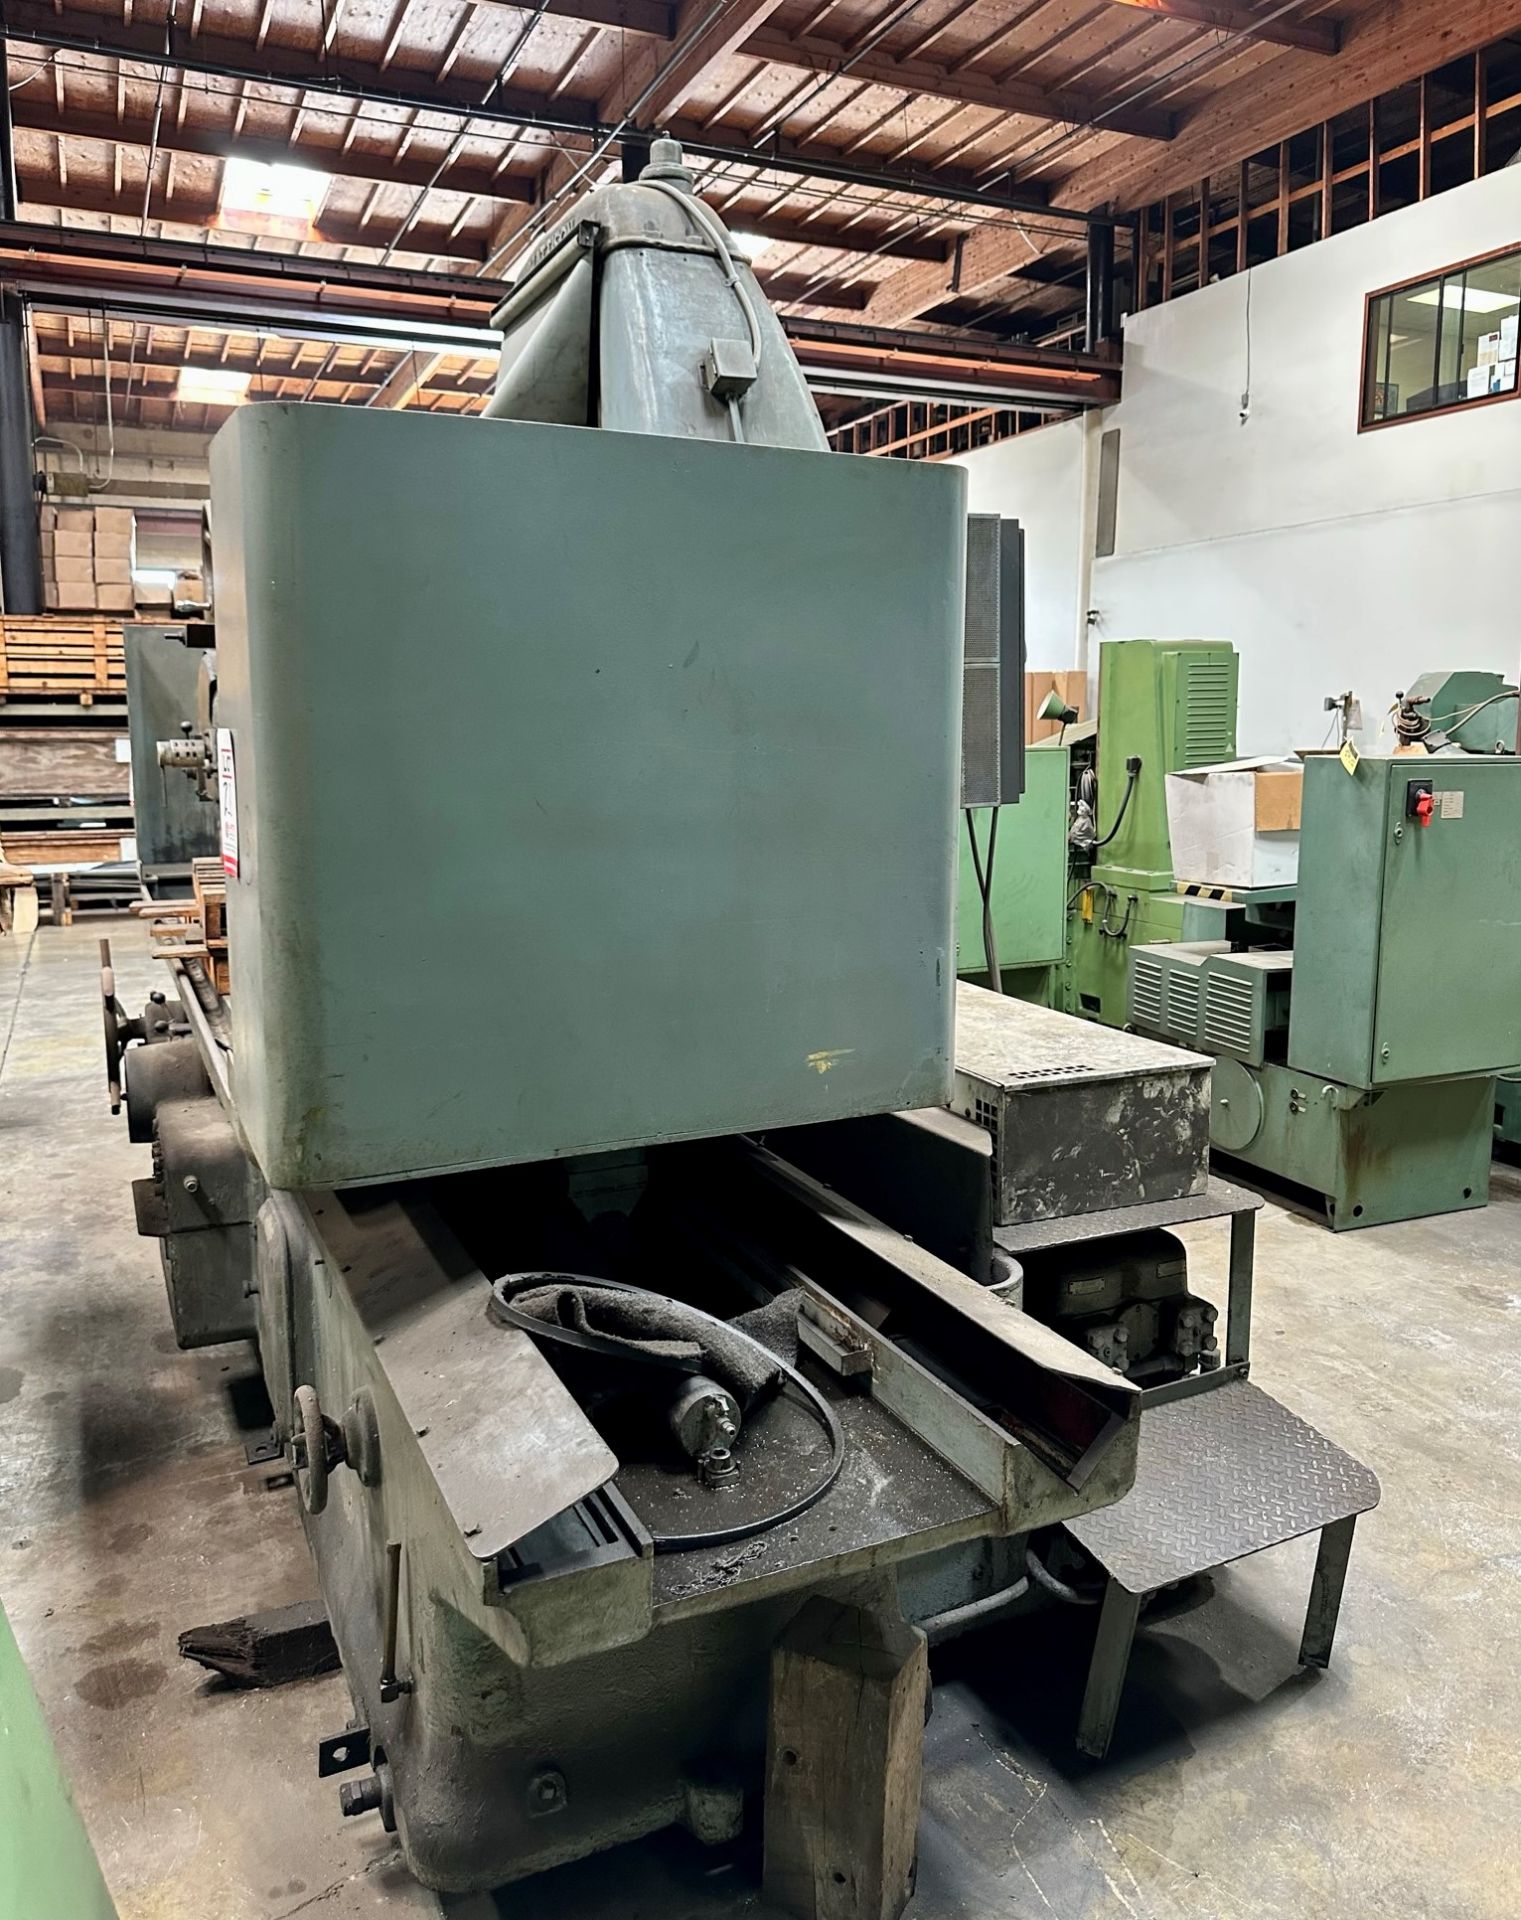 MATTISON SURFACE GRINDER, 104" X 36" WORKING SURFACE, USED, (LOCATION: SANTA FE SPRINGS, CA) - Image 9 of 10